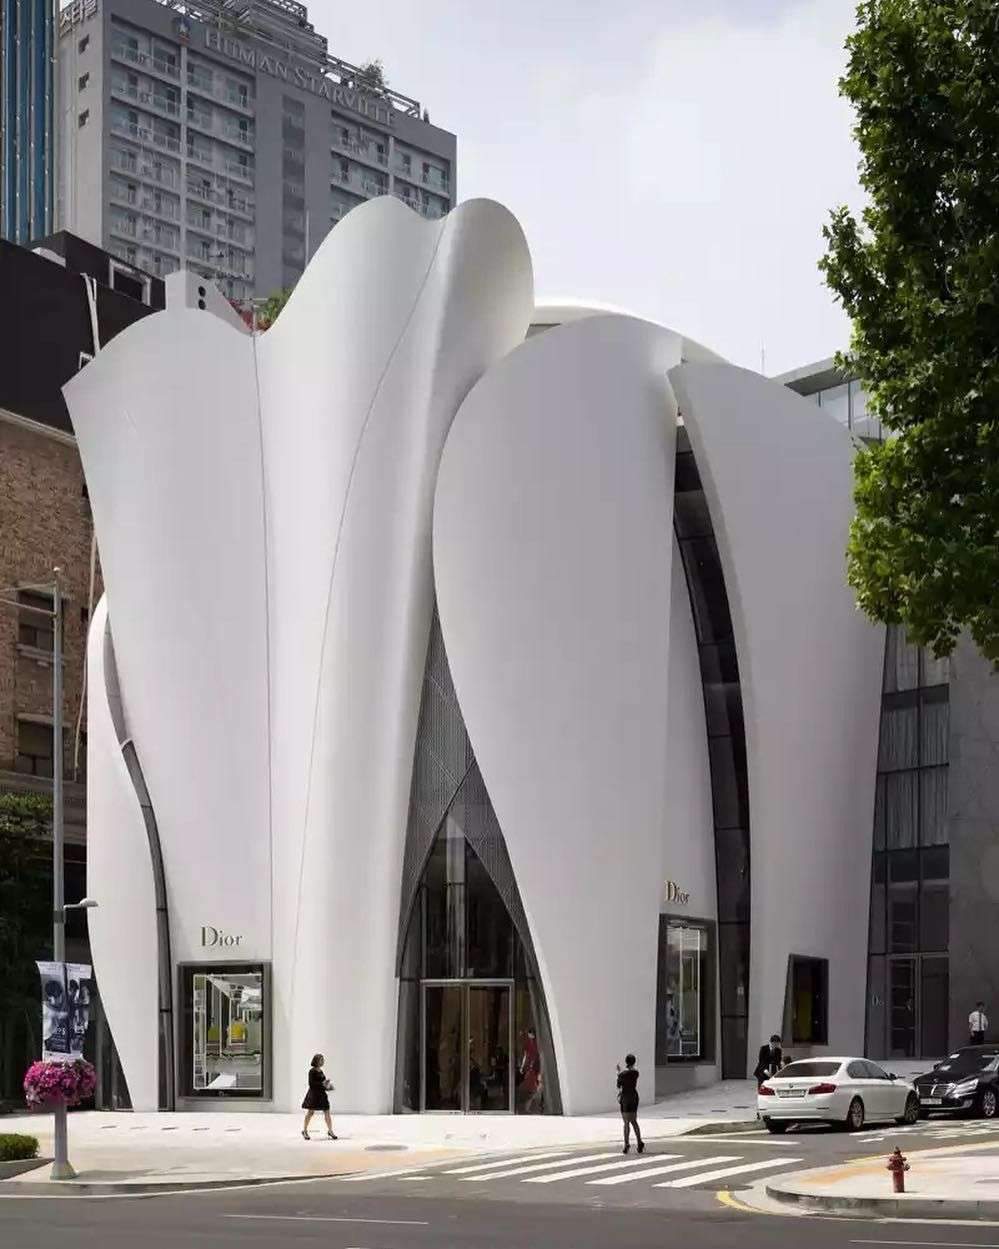 Dior Flagship Store In Seoul Architect Christian de Portzamparc worked together with local architects…